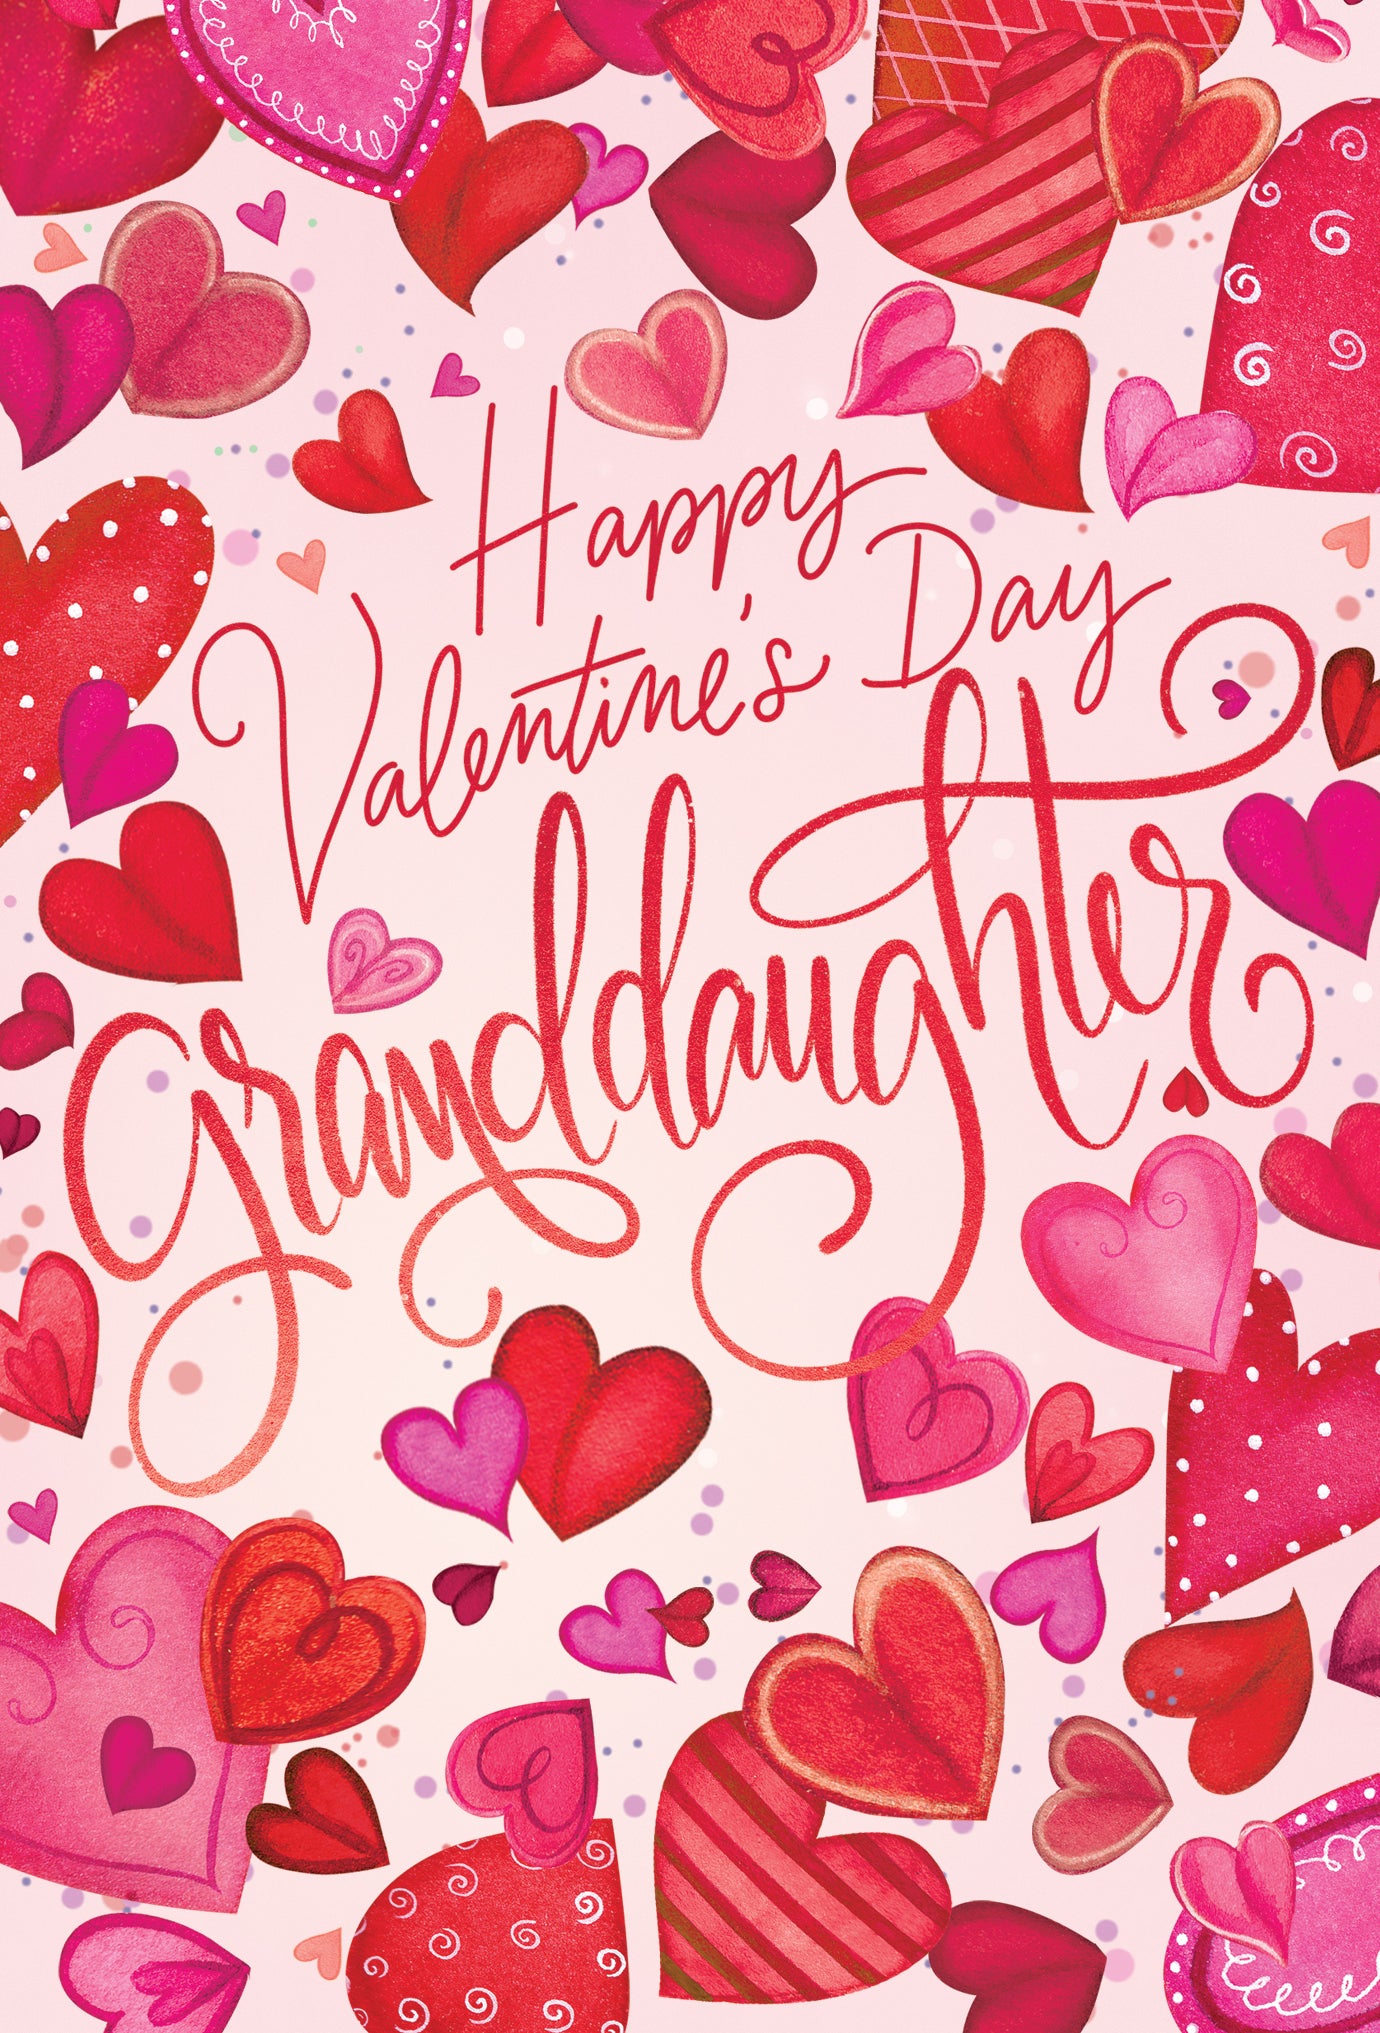 Favorite People Valentine's Card Pictura USA Greeting Cards